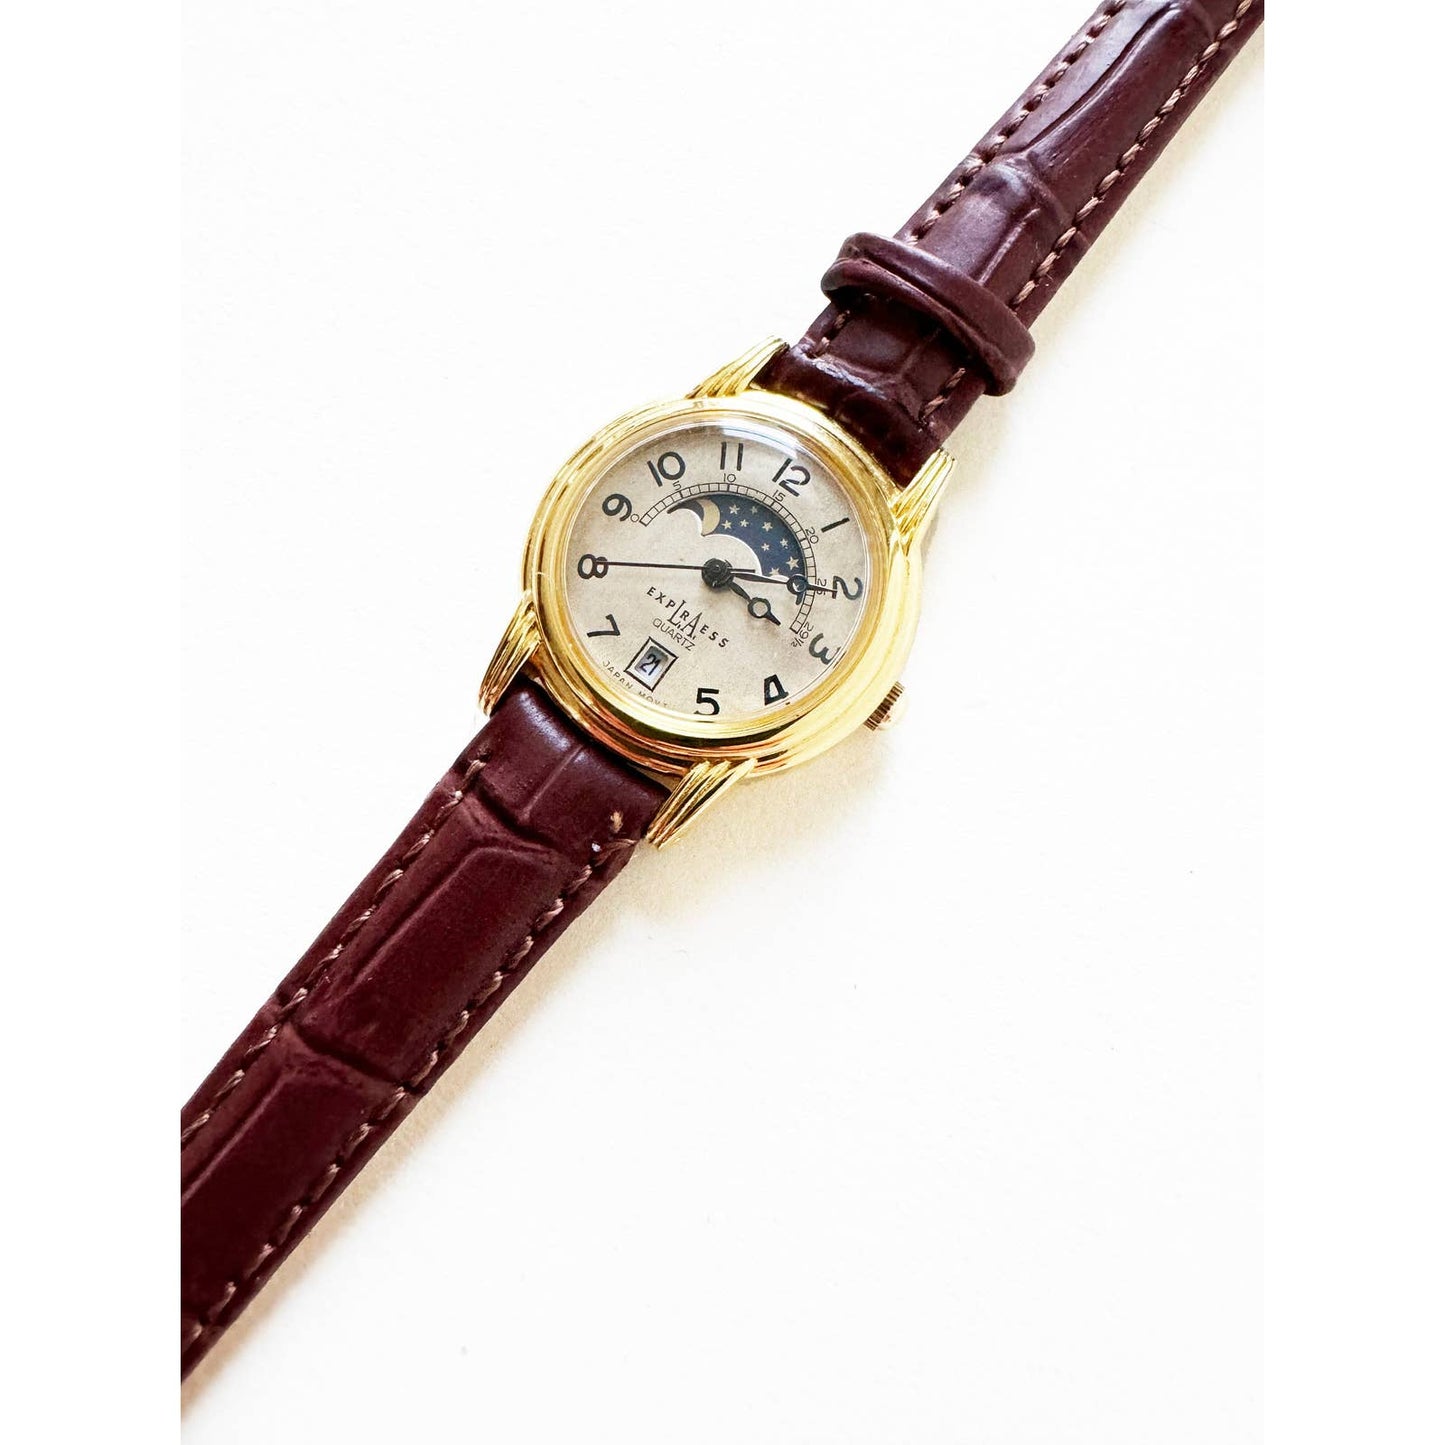 Vintage Leather Watch with Brown Band and Gold Details and Sky no